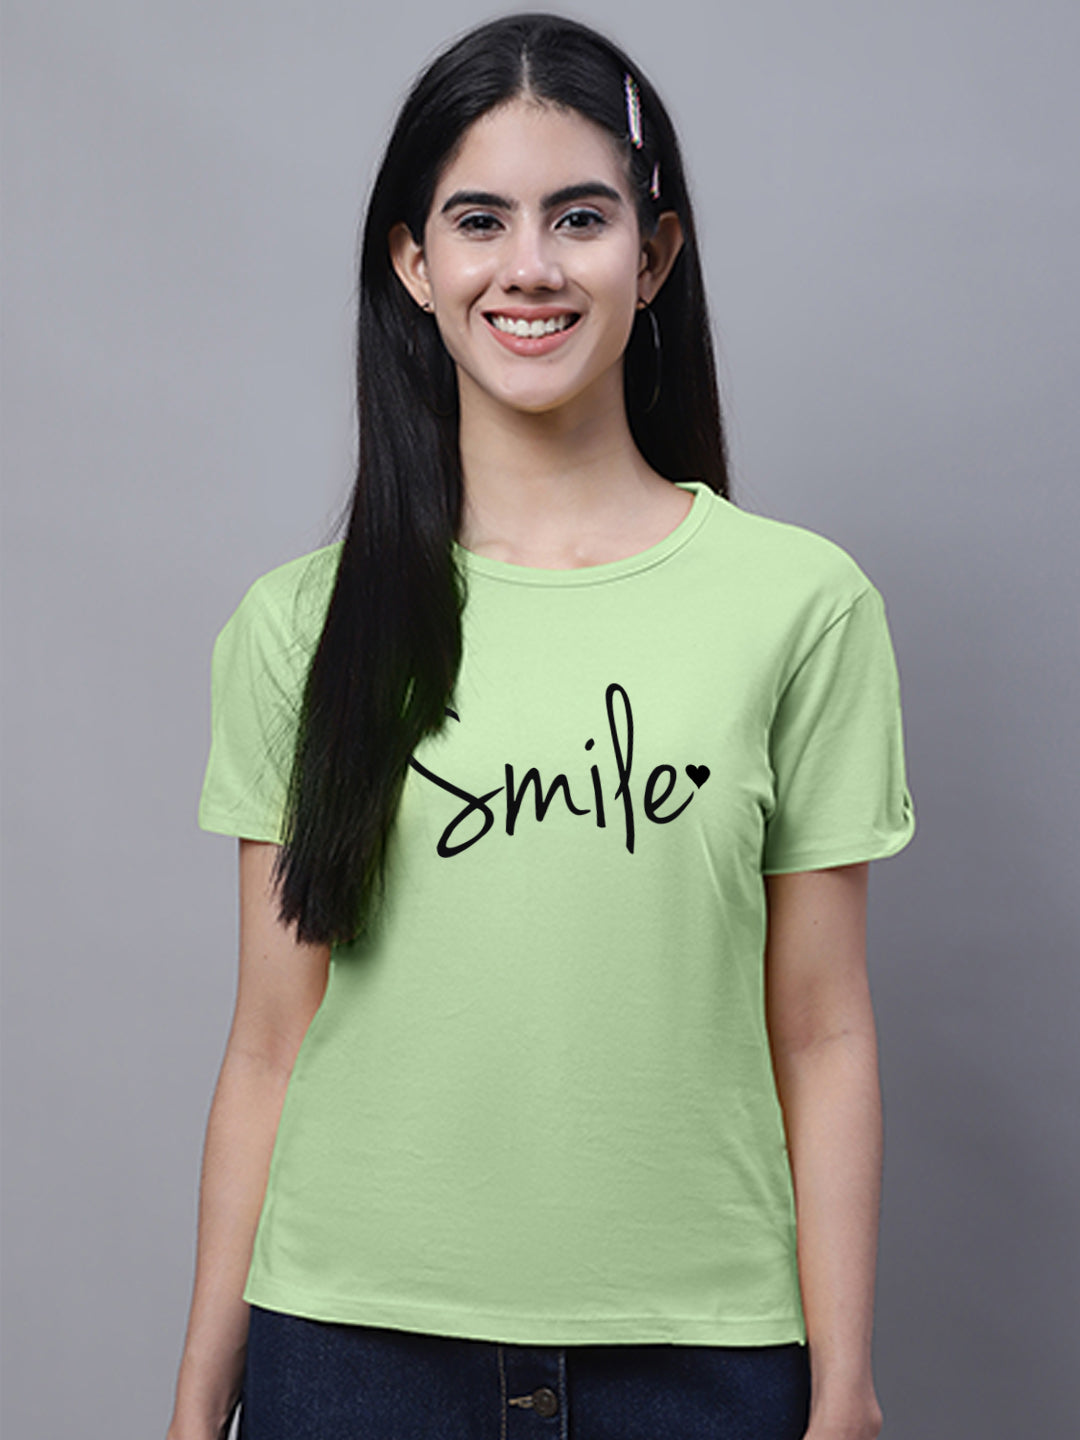 Fbar Women's Smile Printed Cotton T-Shirt with Slit Sleeves - Friskers